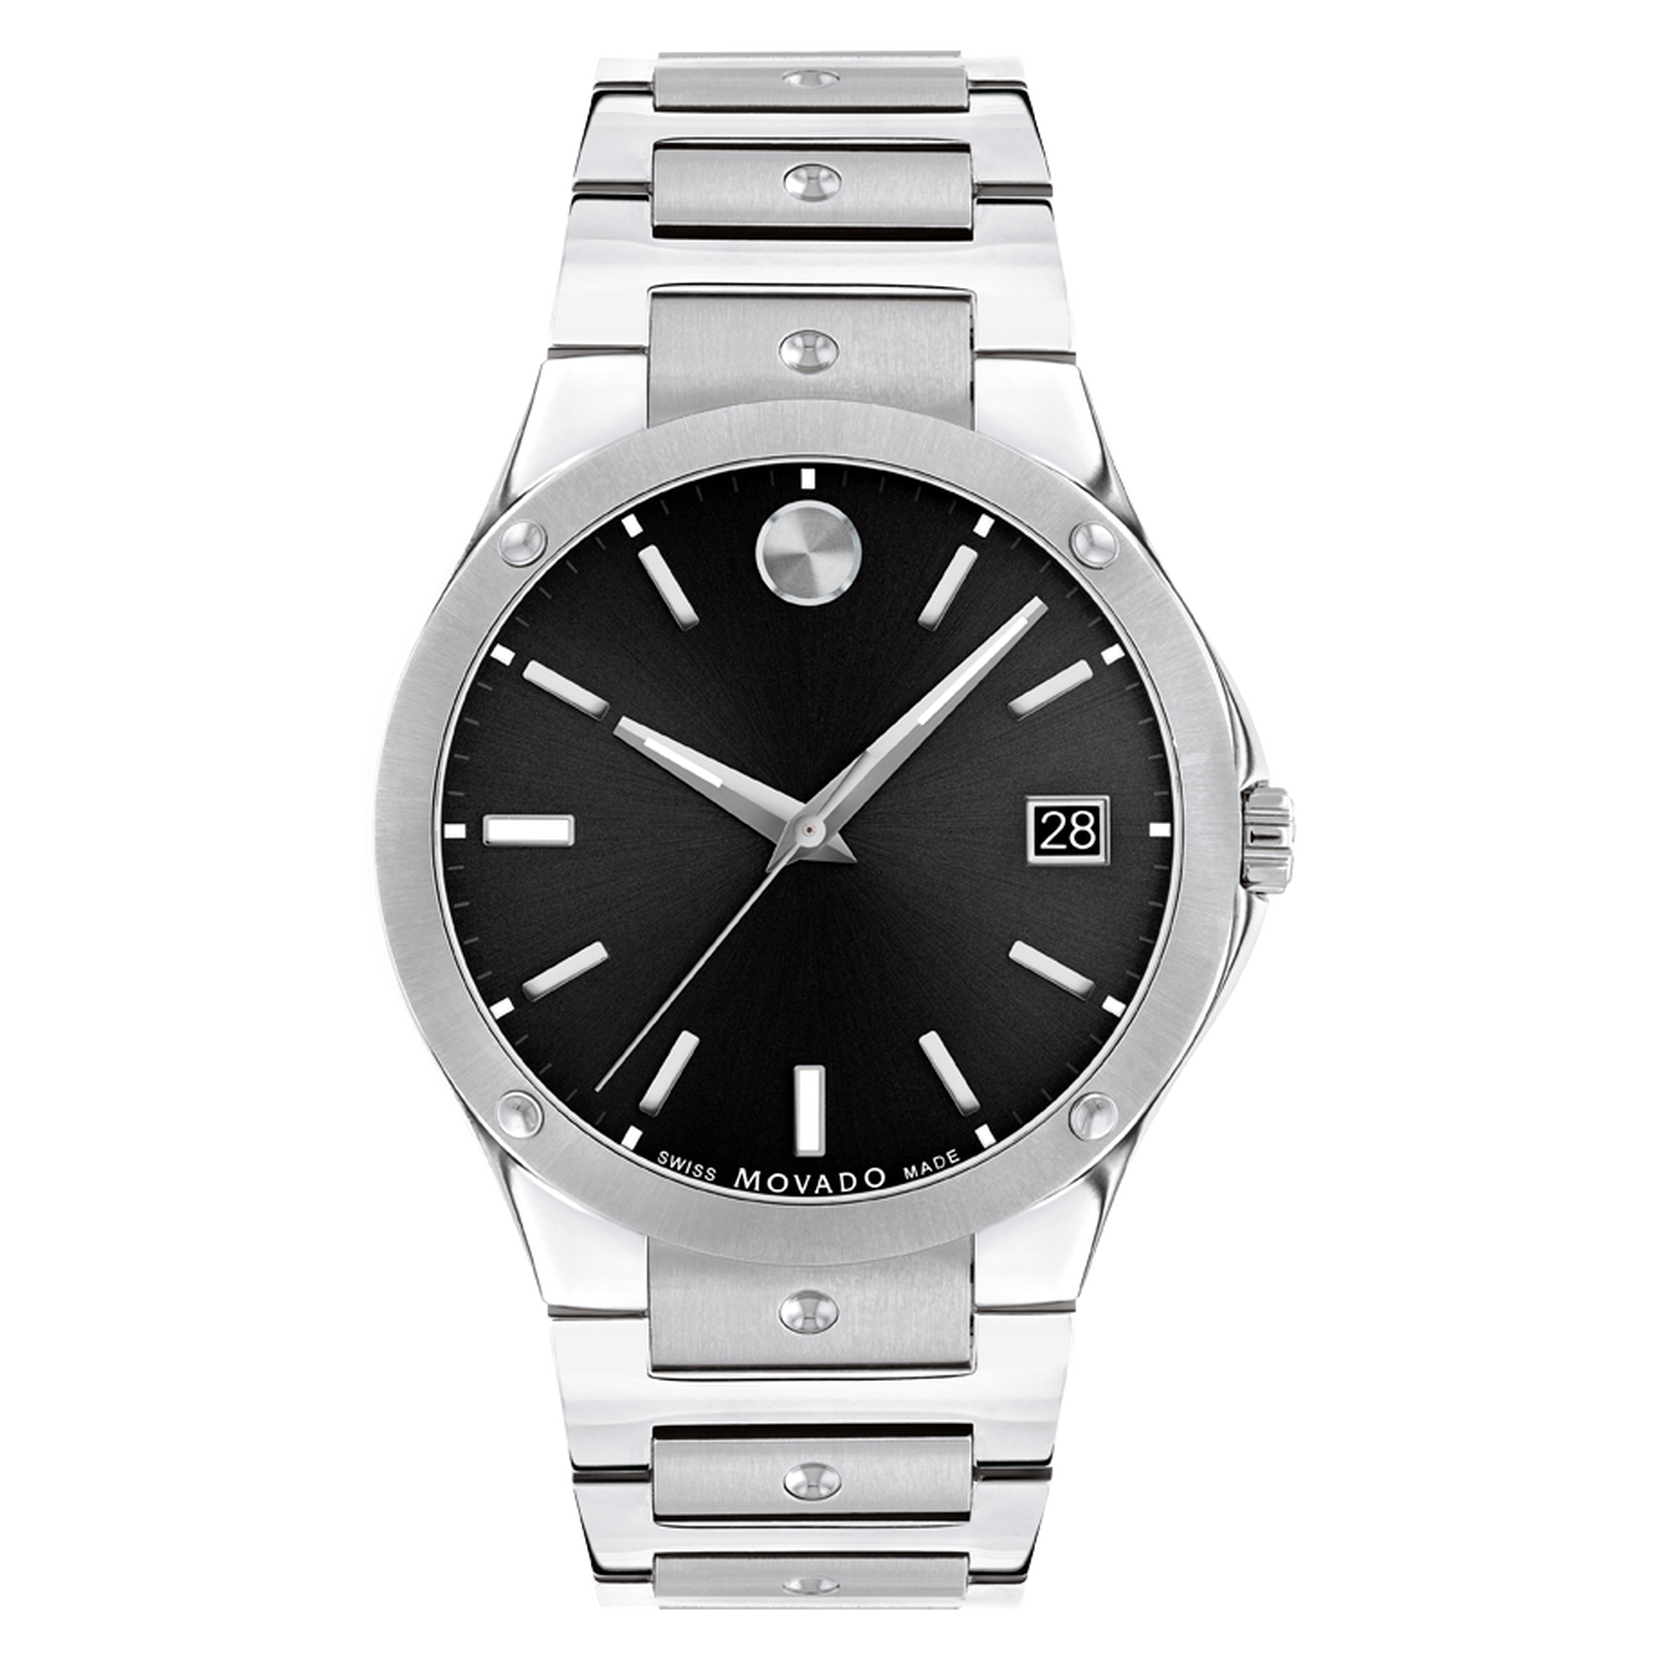 Movado |Movado SE Stainless Steel Watch With Black Dial | Schweizer Uhren